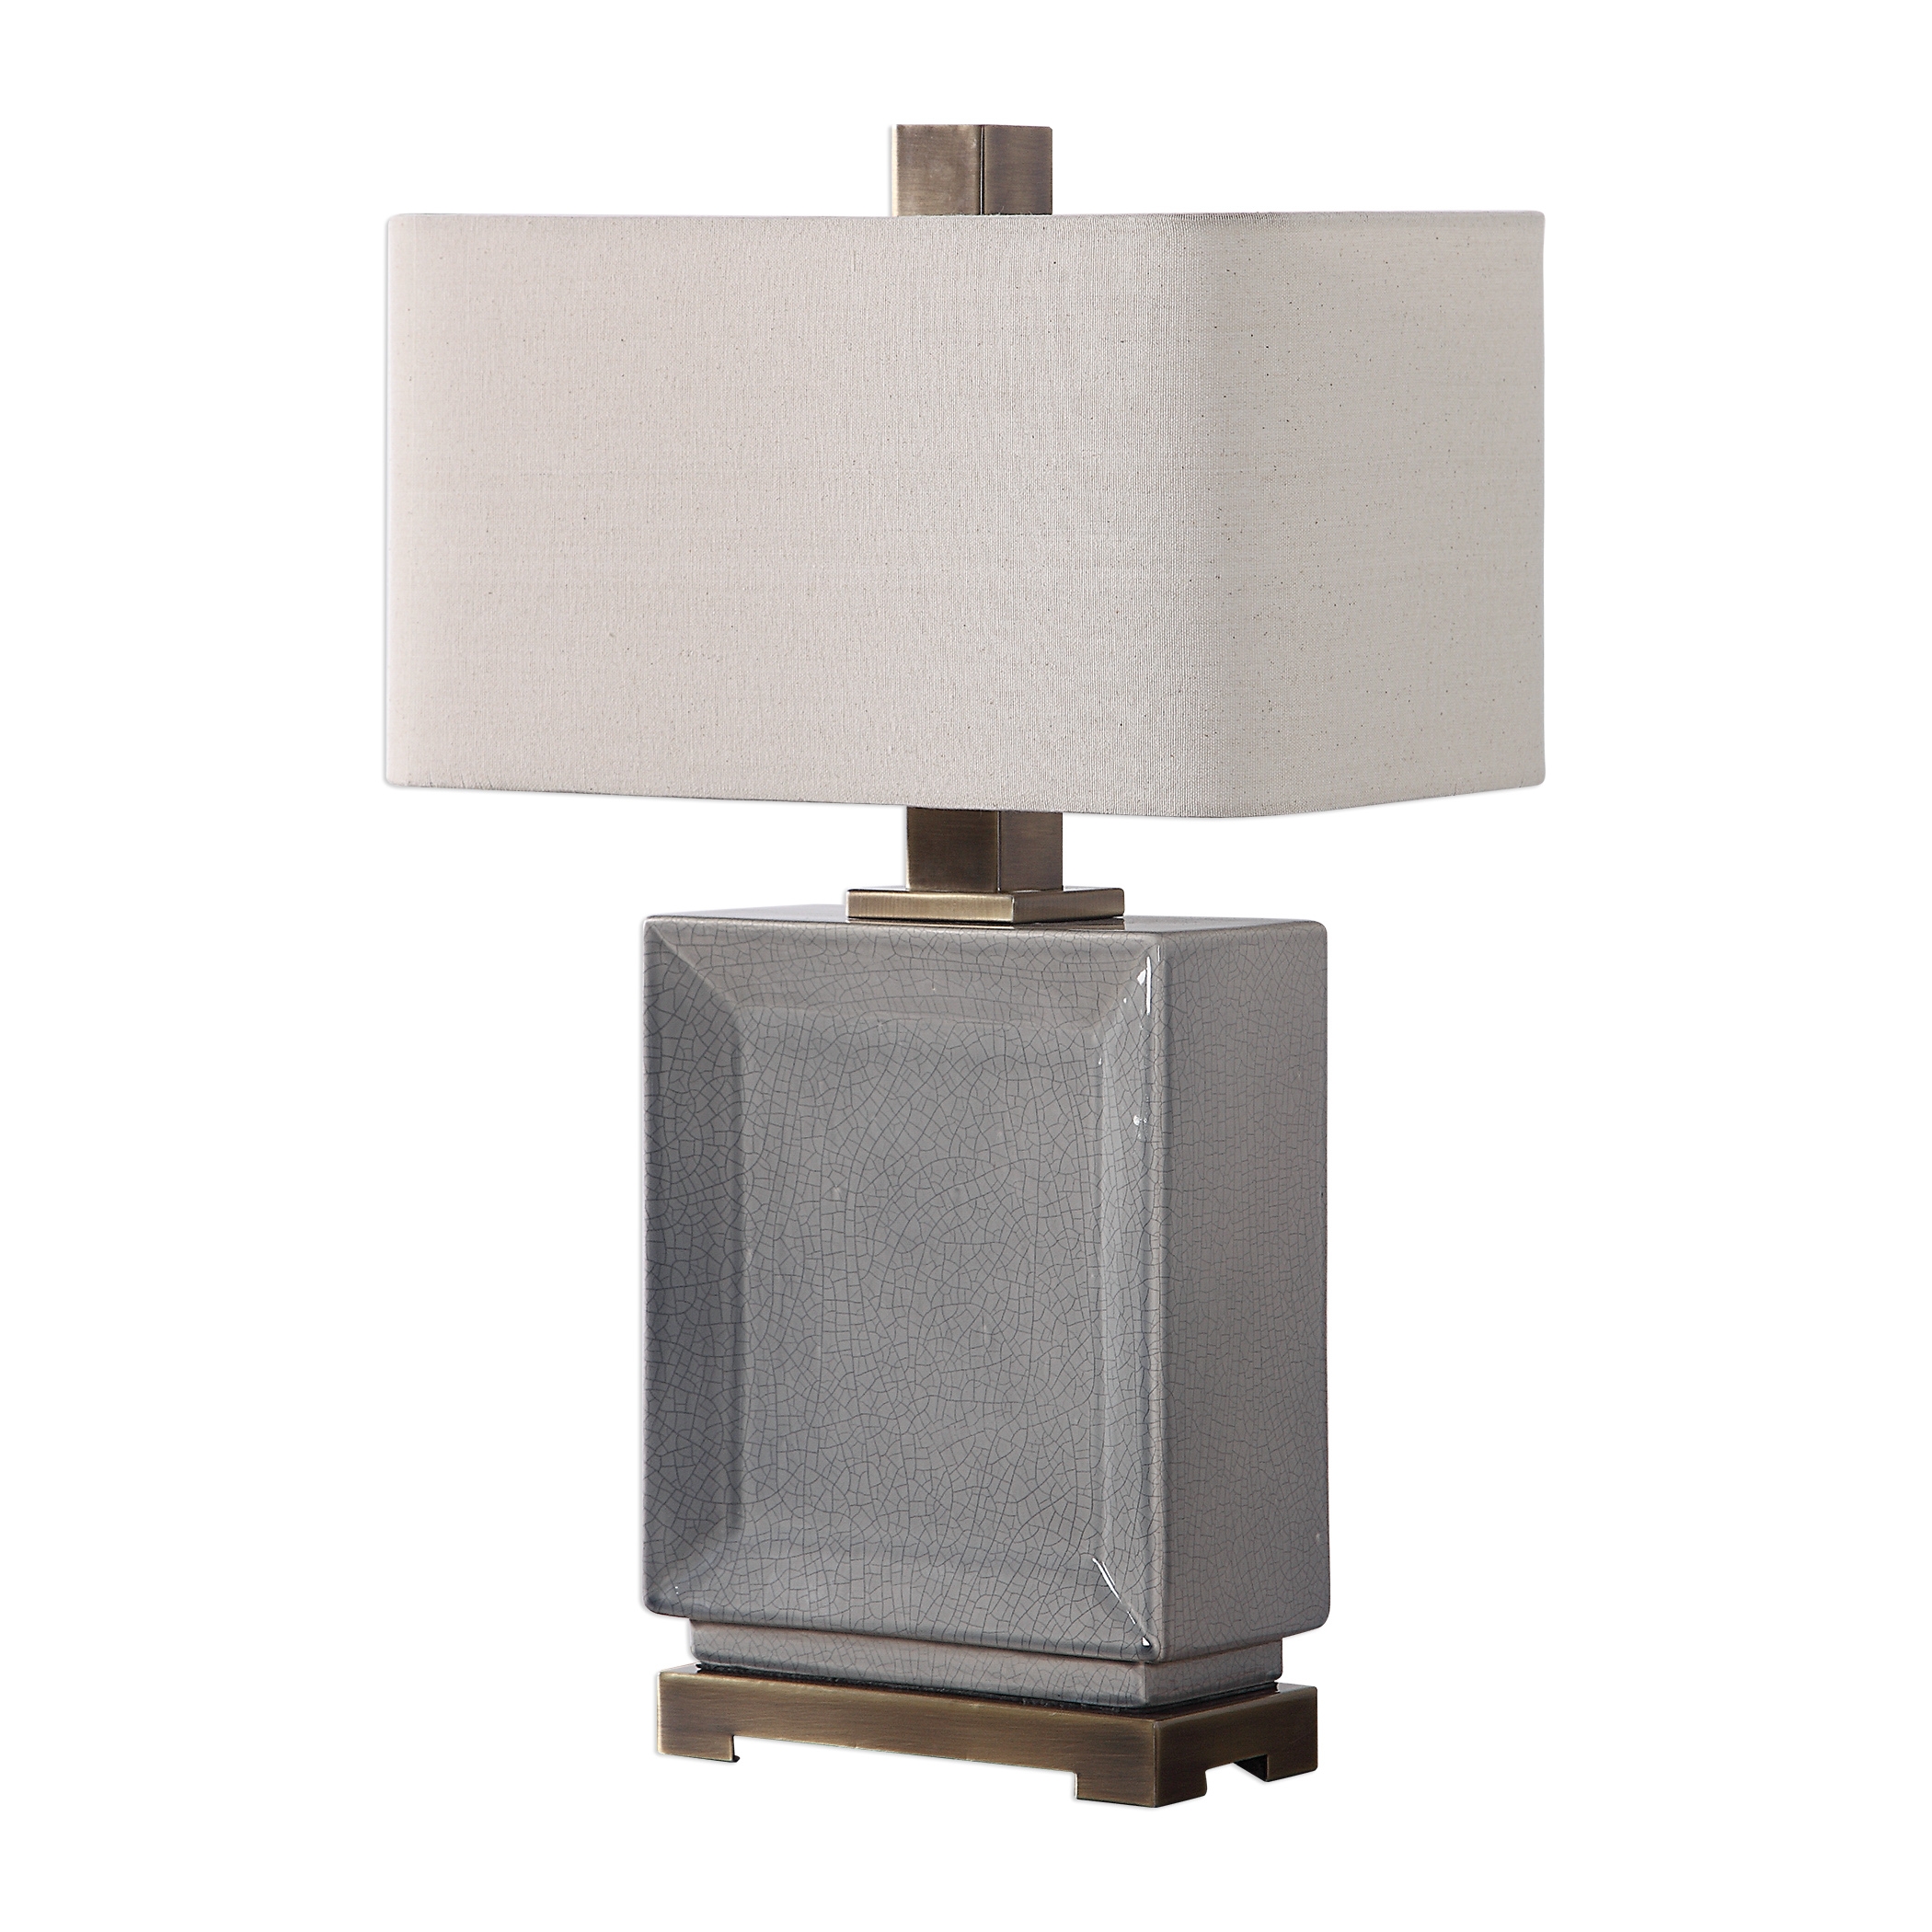 Abbot Crackled Gray Table Lamp - Image 4